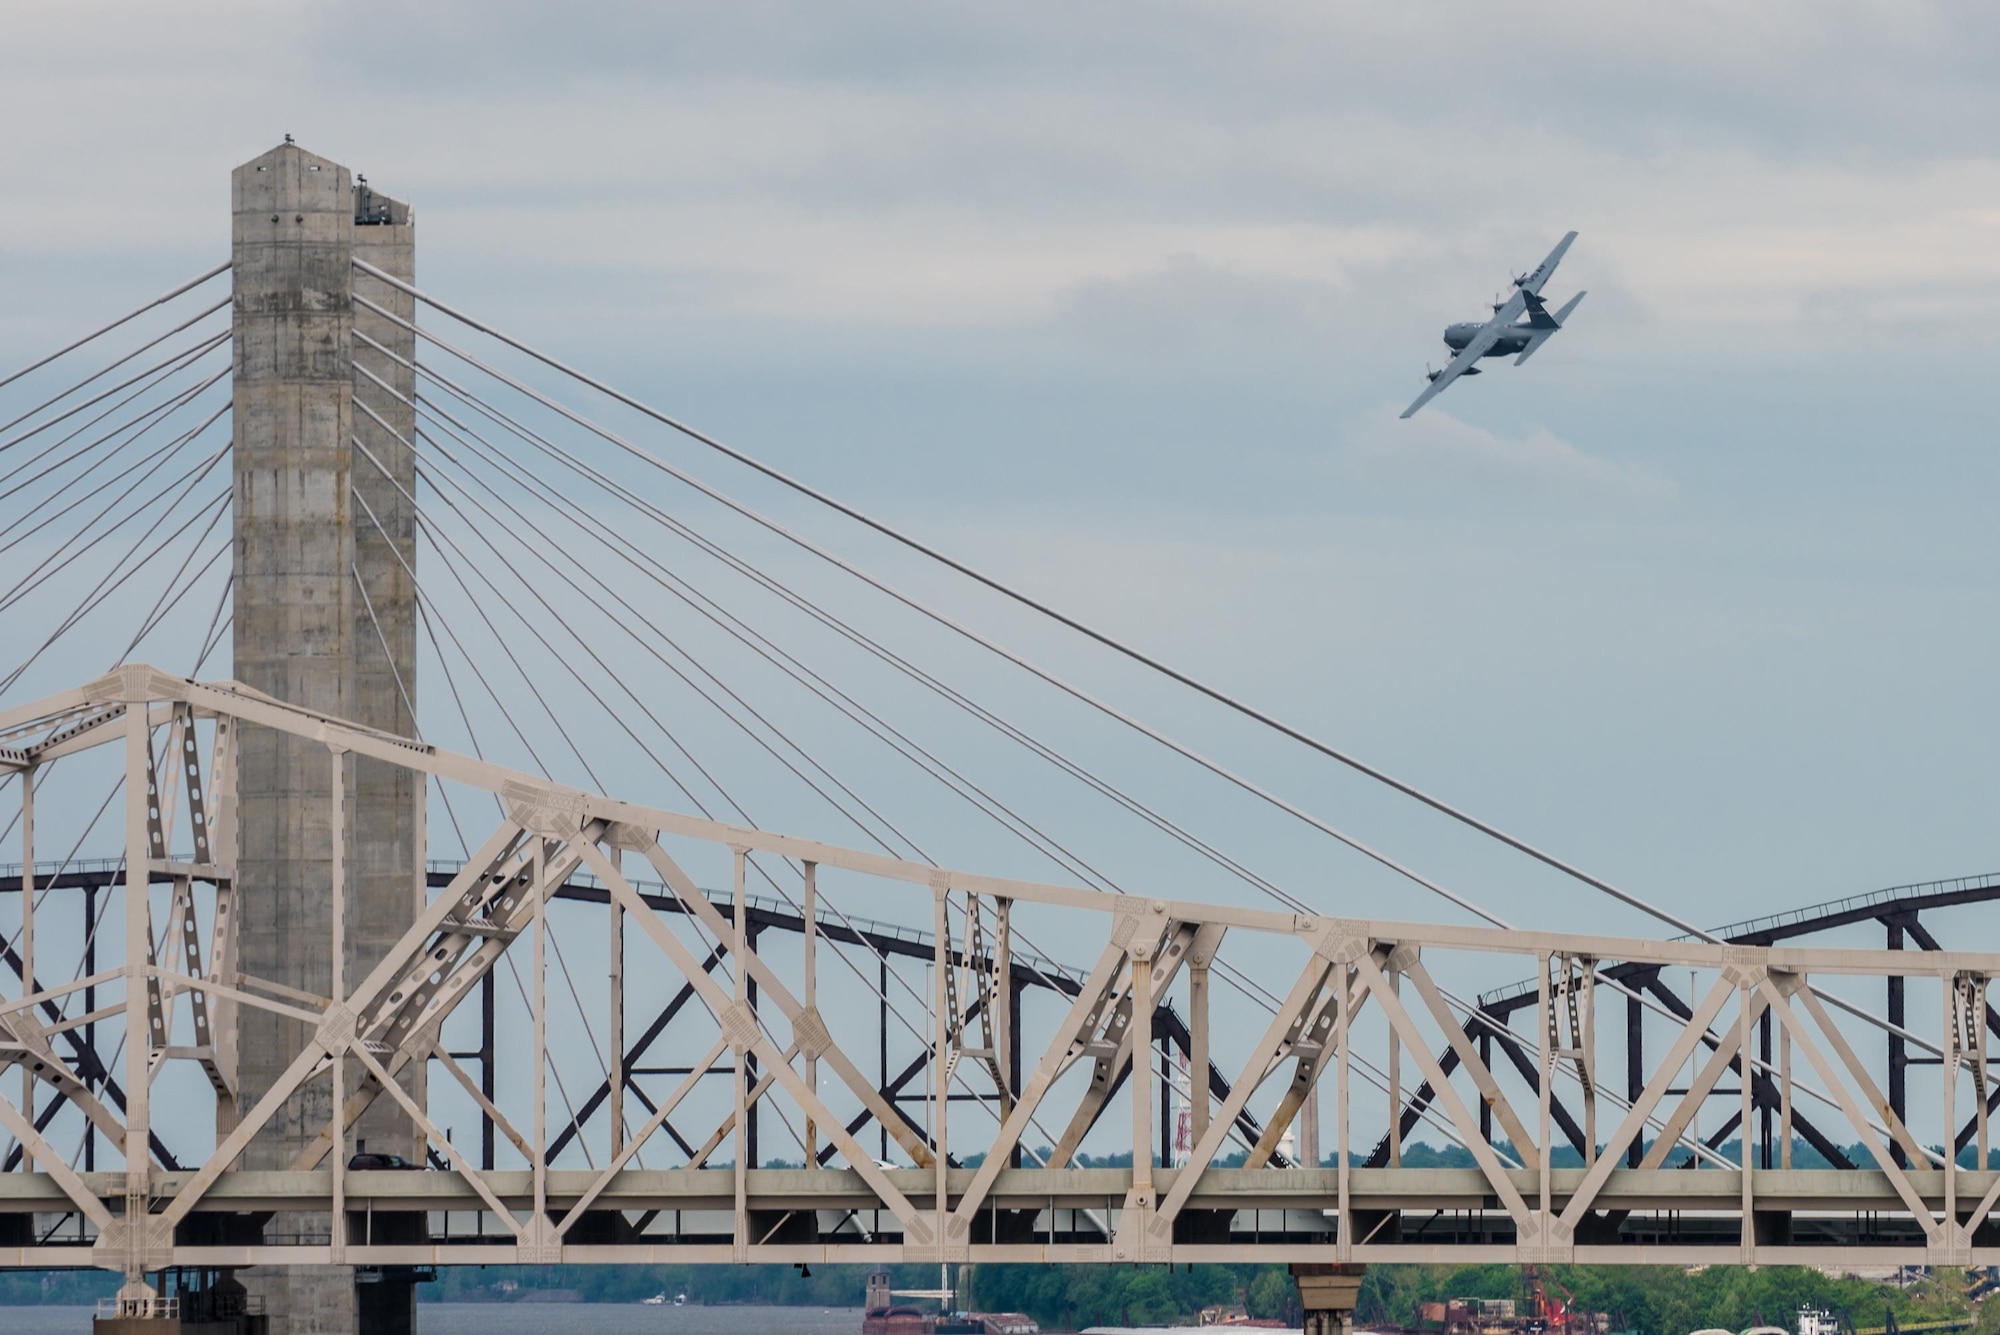 A C-130 Hercules aircraft from the Kentucky Air National Guard’s 123rd Airlift Wing performs an aerial demonstration above the Ohio River during the Thunder Over Louisville air show in Louisville, Ky., April 22, 2017. The annual event has grown to become the largest single-day air show in the nation. (U.S. Air National Guard photo by Lt. Col. Dale Greer)